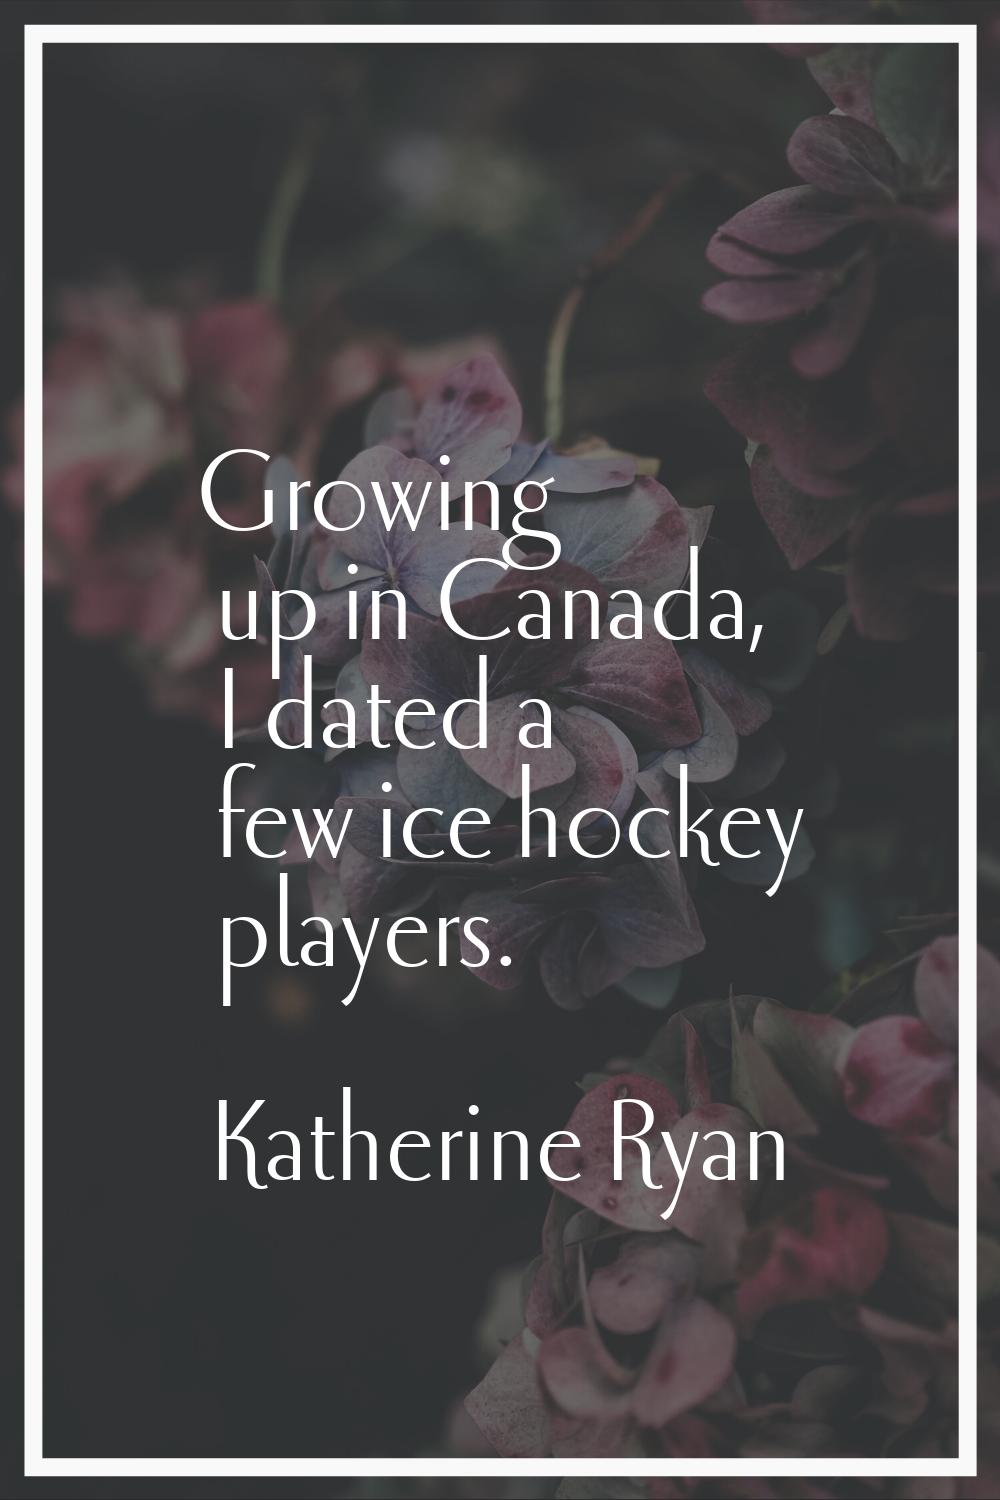 Growing up in Canada, I dated a few ice hockey players.